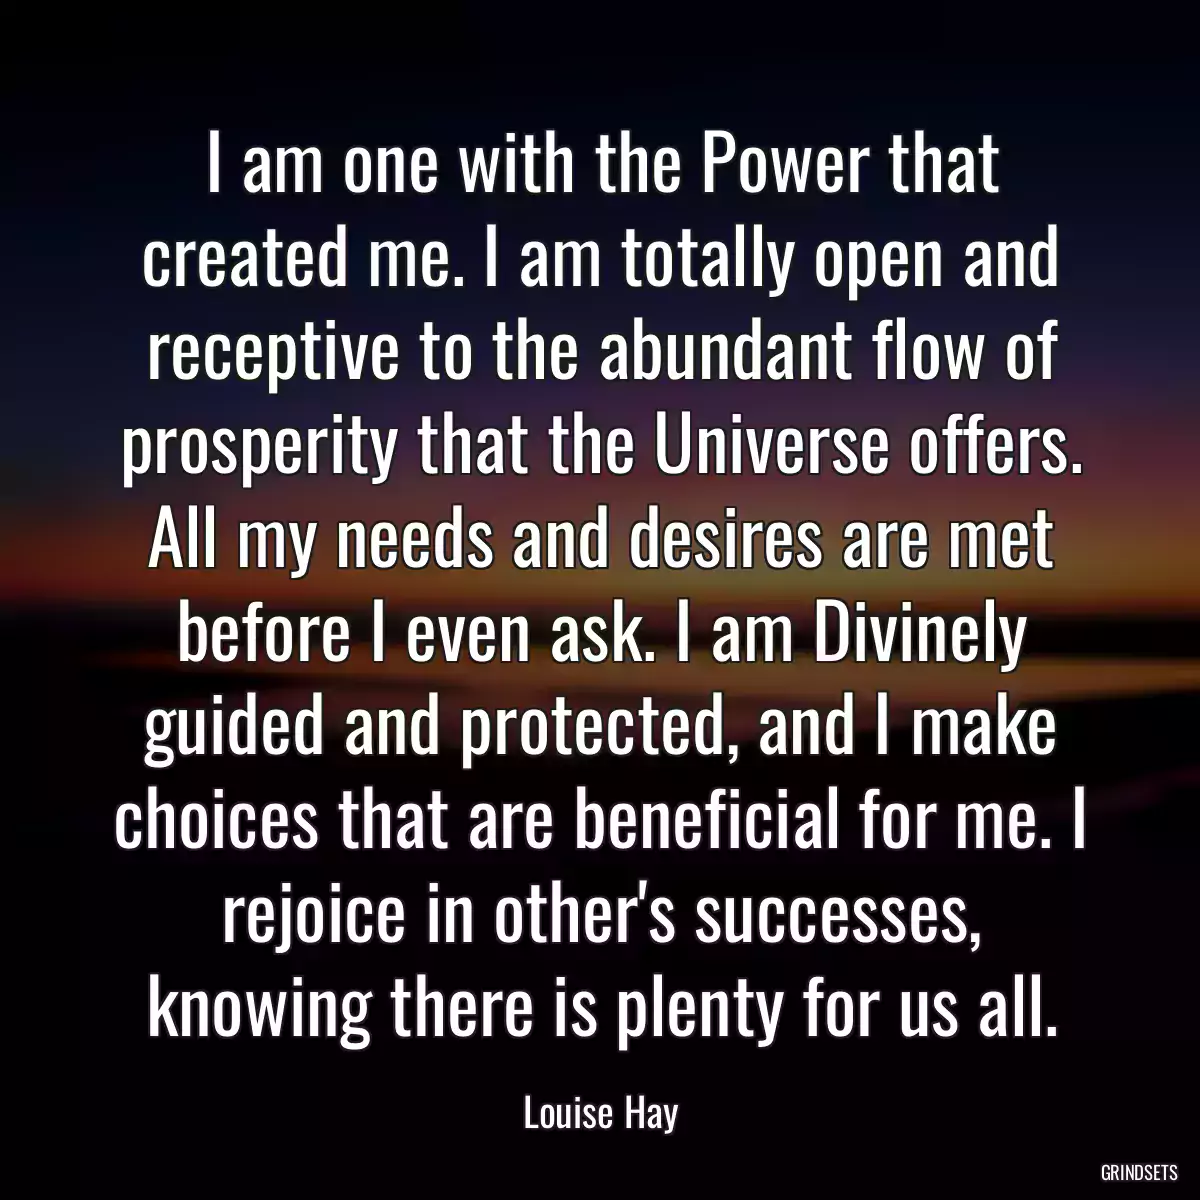 I am one with the Power that created me. I am totally open and receptive to the abundant flow of prosperity that the Universe offers. All my needs and desires are met before I even ask. I am Divinely guided and protected, and I make choices that are beneficial for me. I rejoice in other\'s successes, knowing there is plenty for us all.